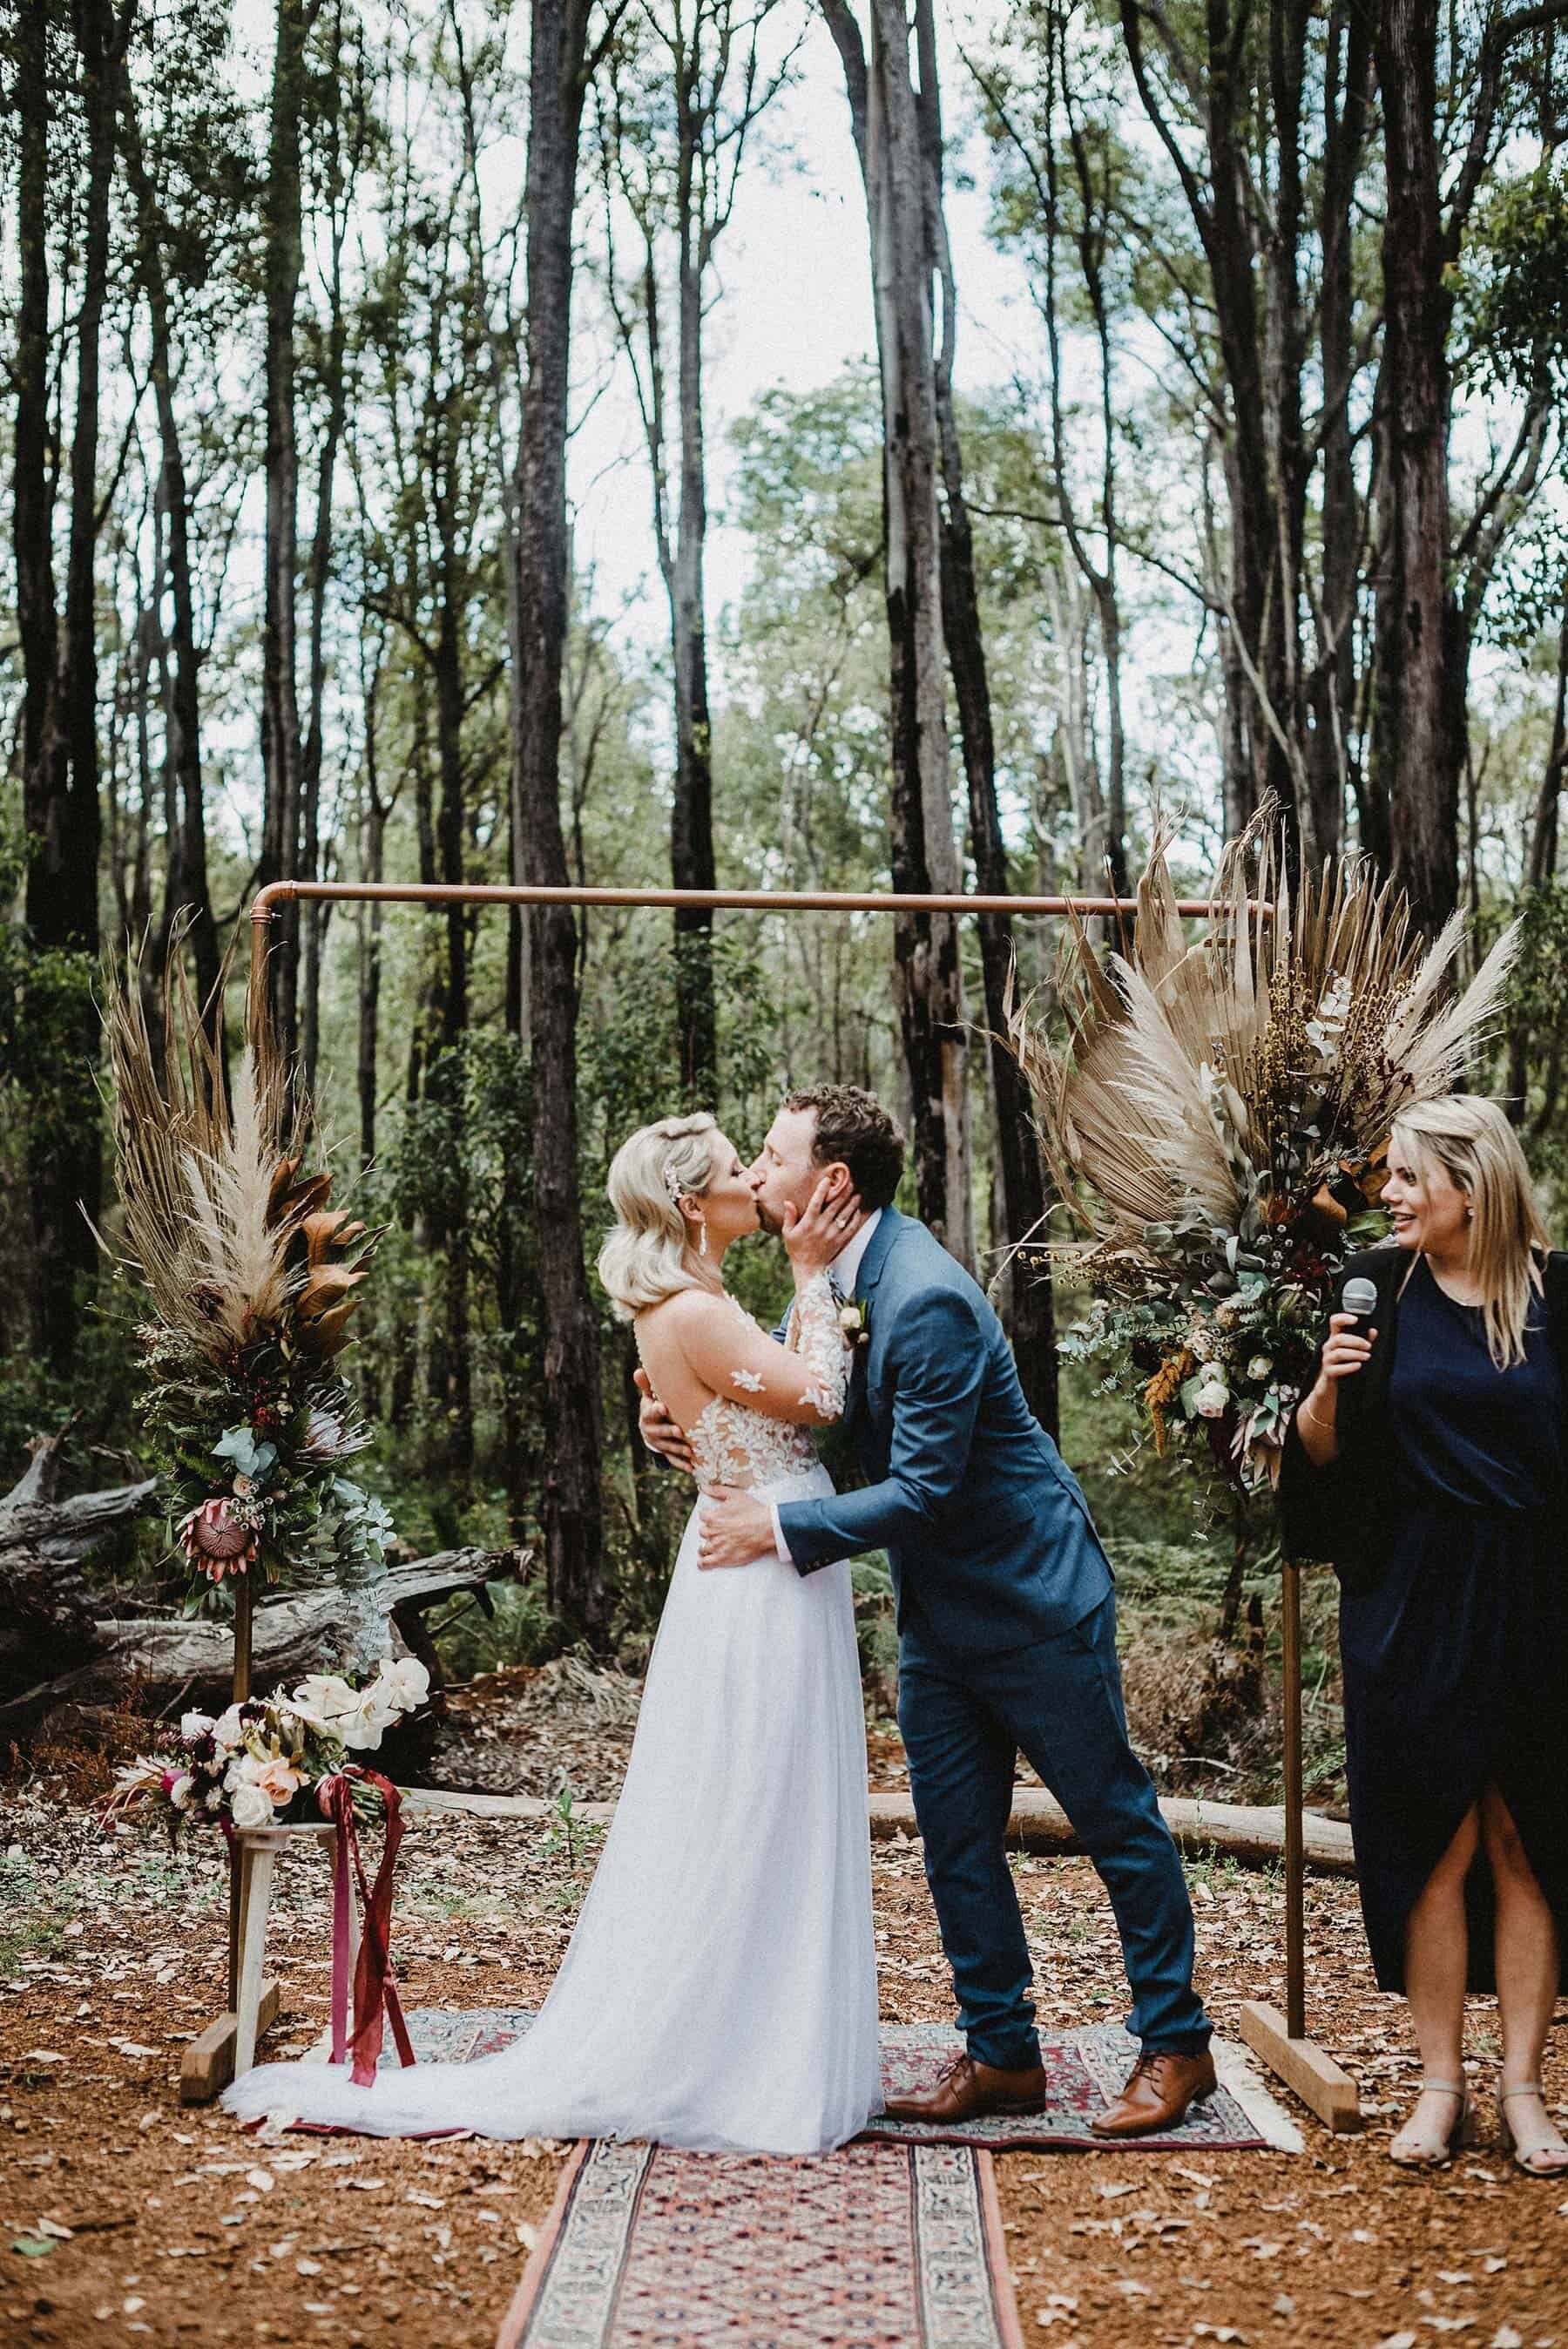 Paula & Jo bridal gown with groom's navy suit in forest wedding